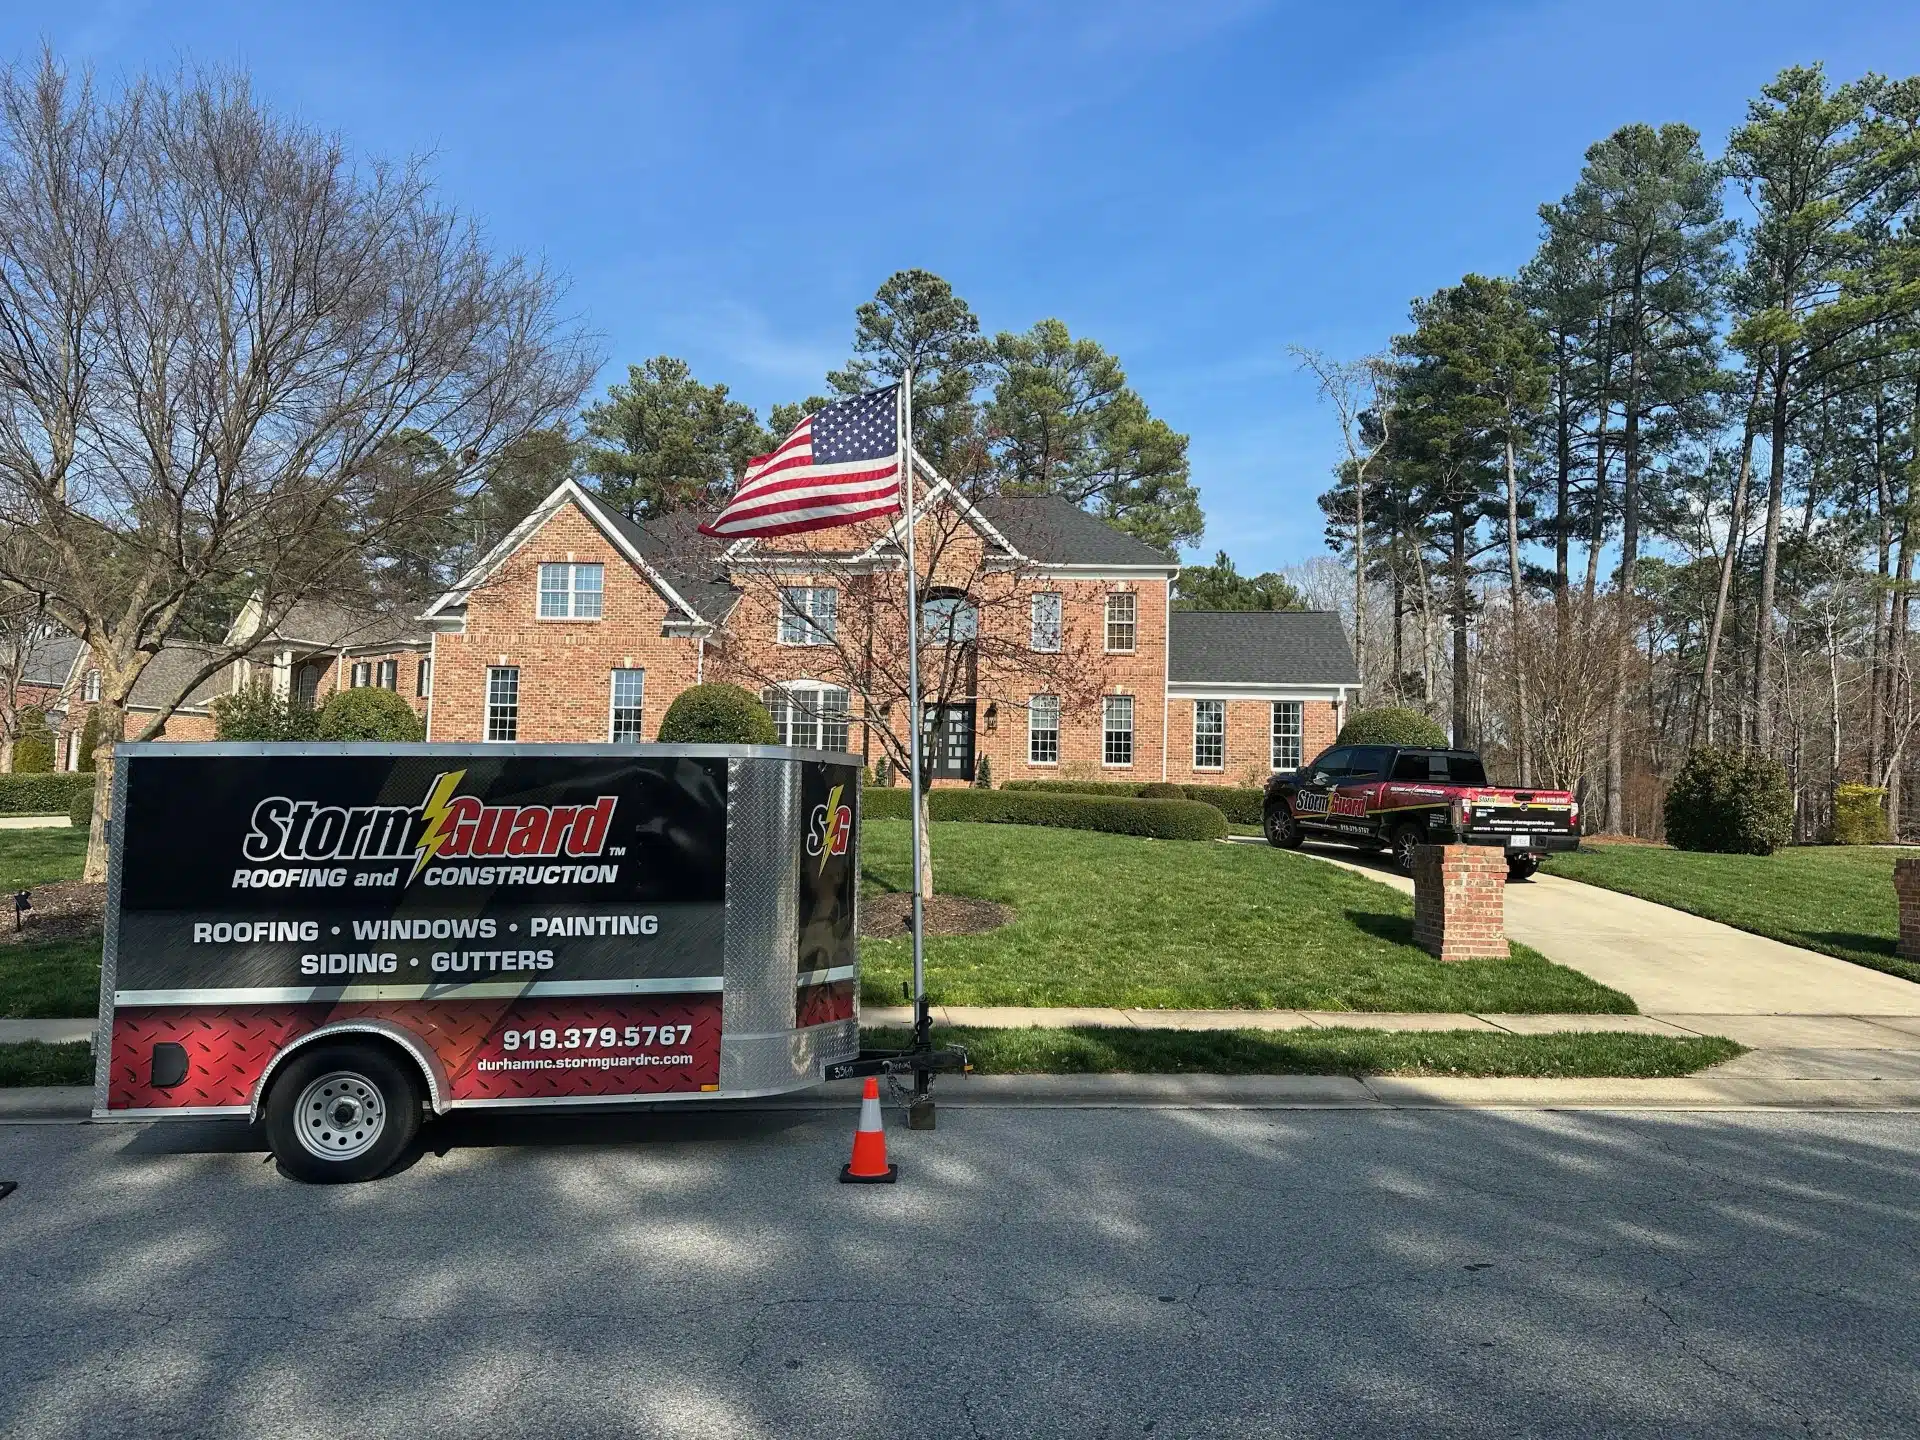 Brick House with Storm Guard Restoration Services Truck In Driveway- Durham Chapel Hill